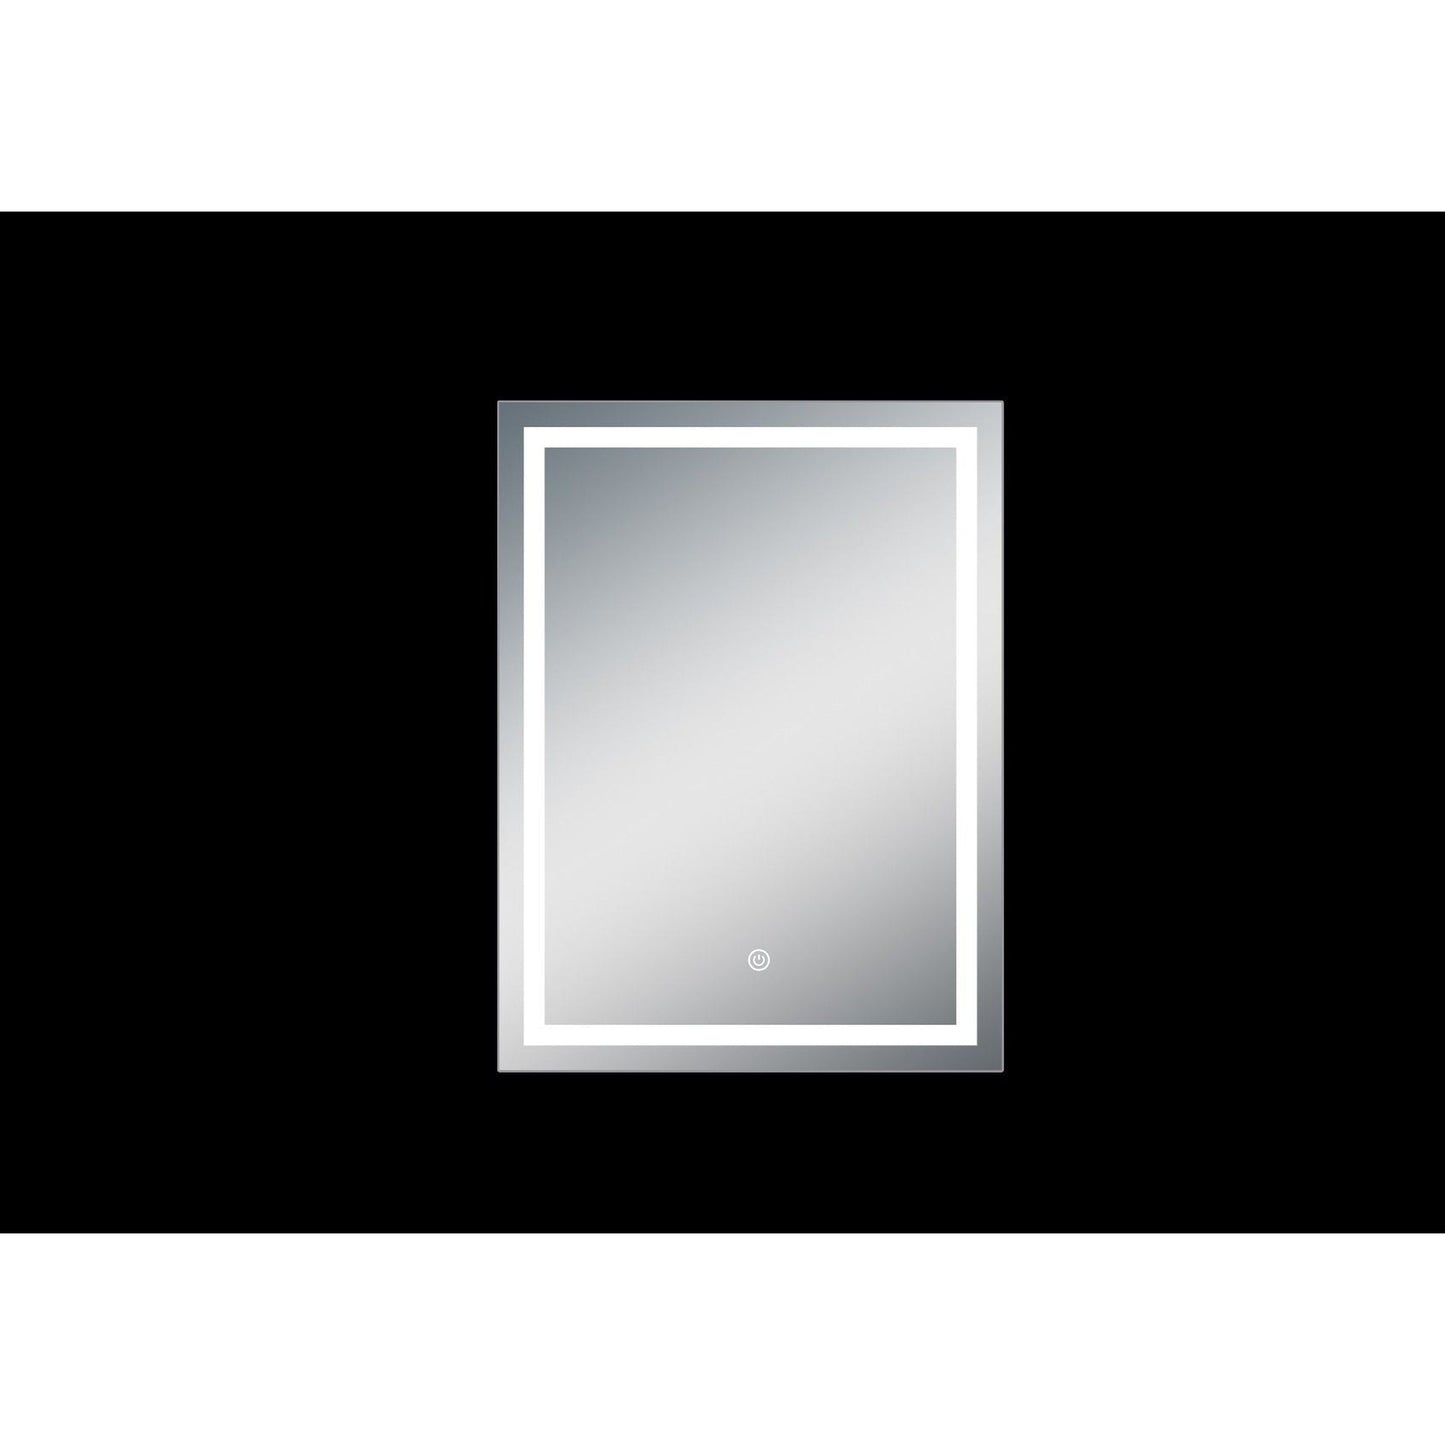 DreamWerks Riga 20" W x 26" H LED Mirror with Dimmer and Defogger